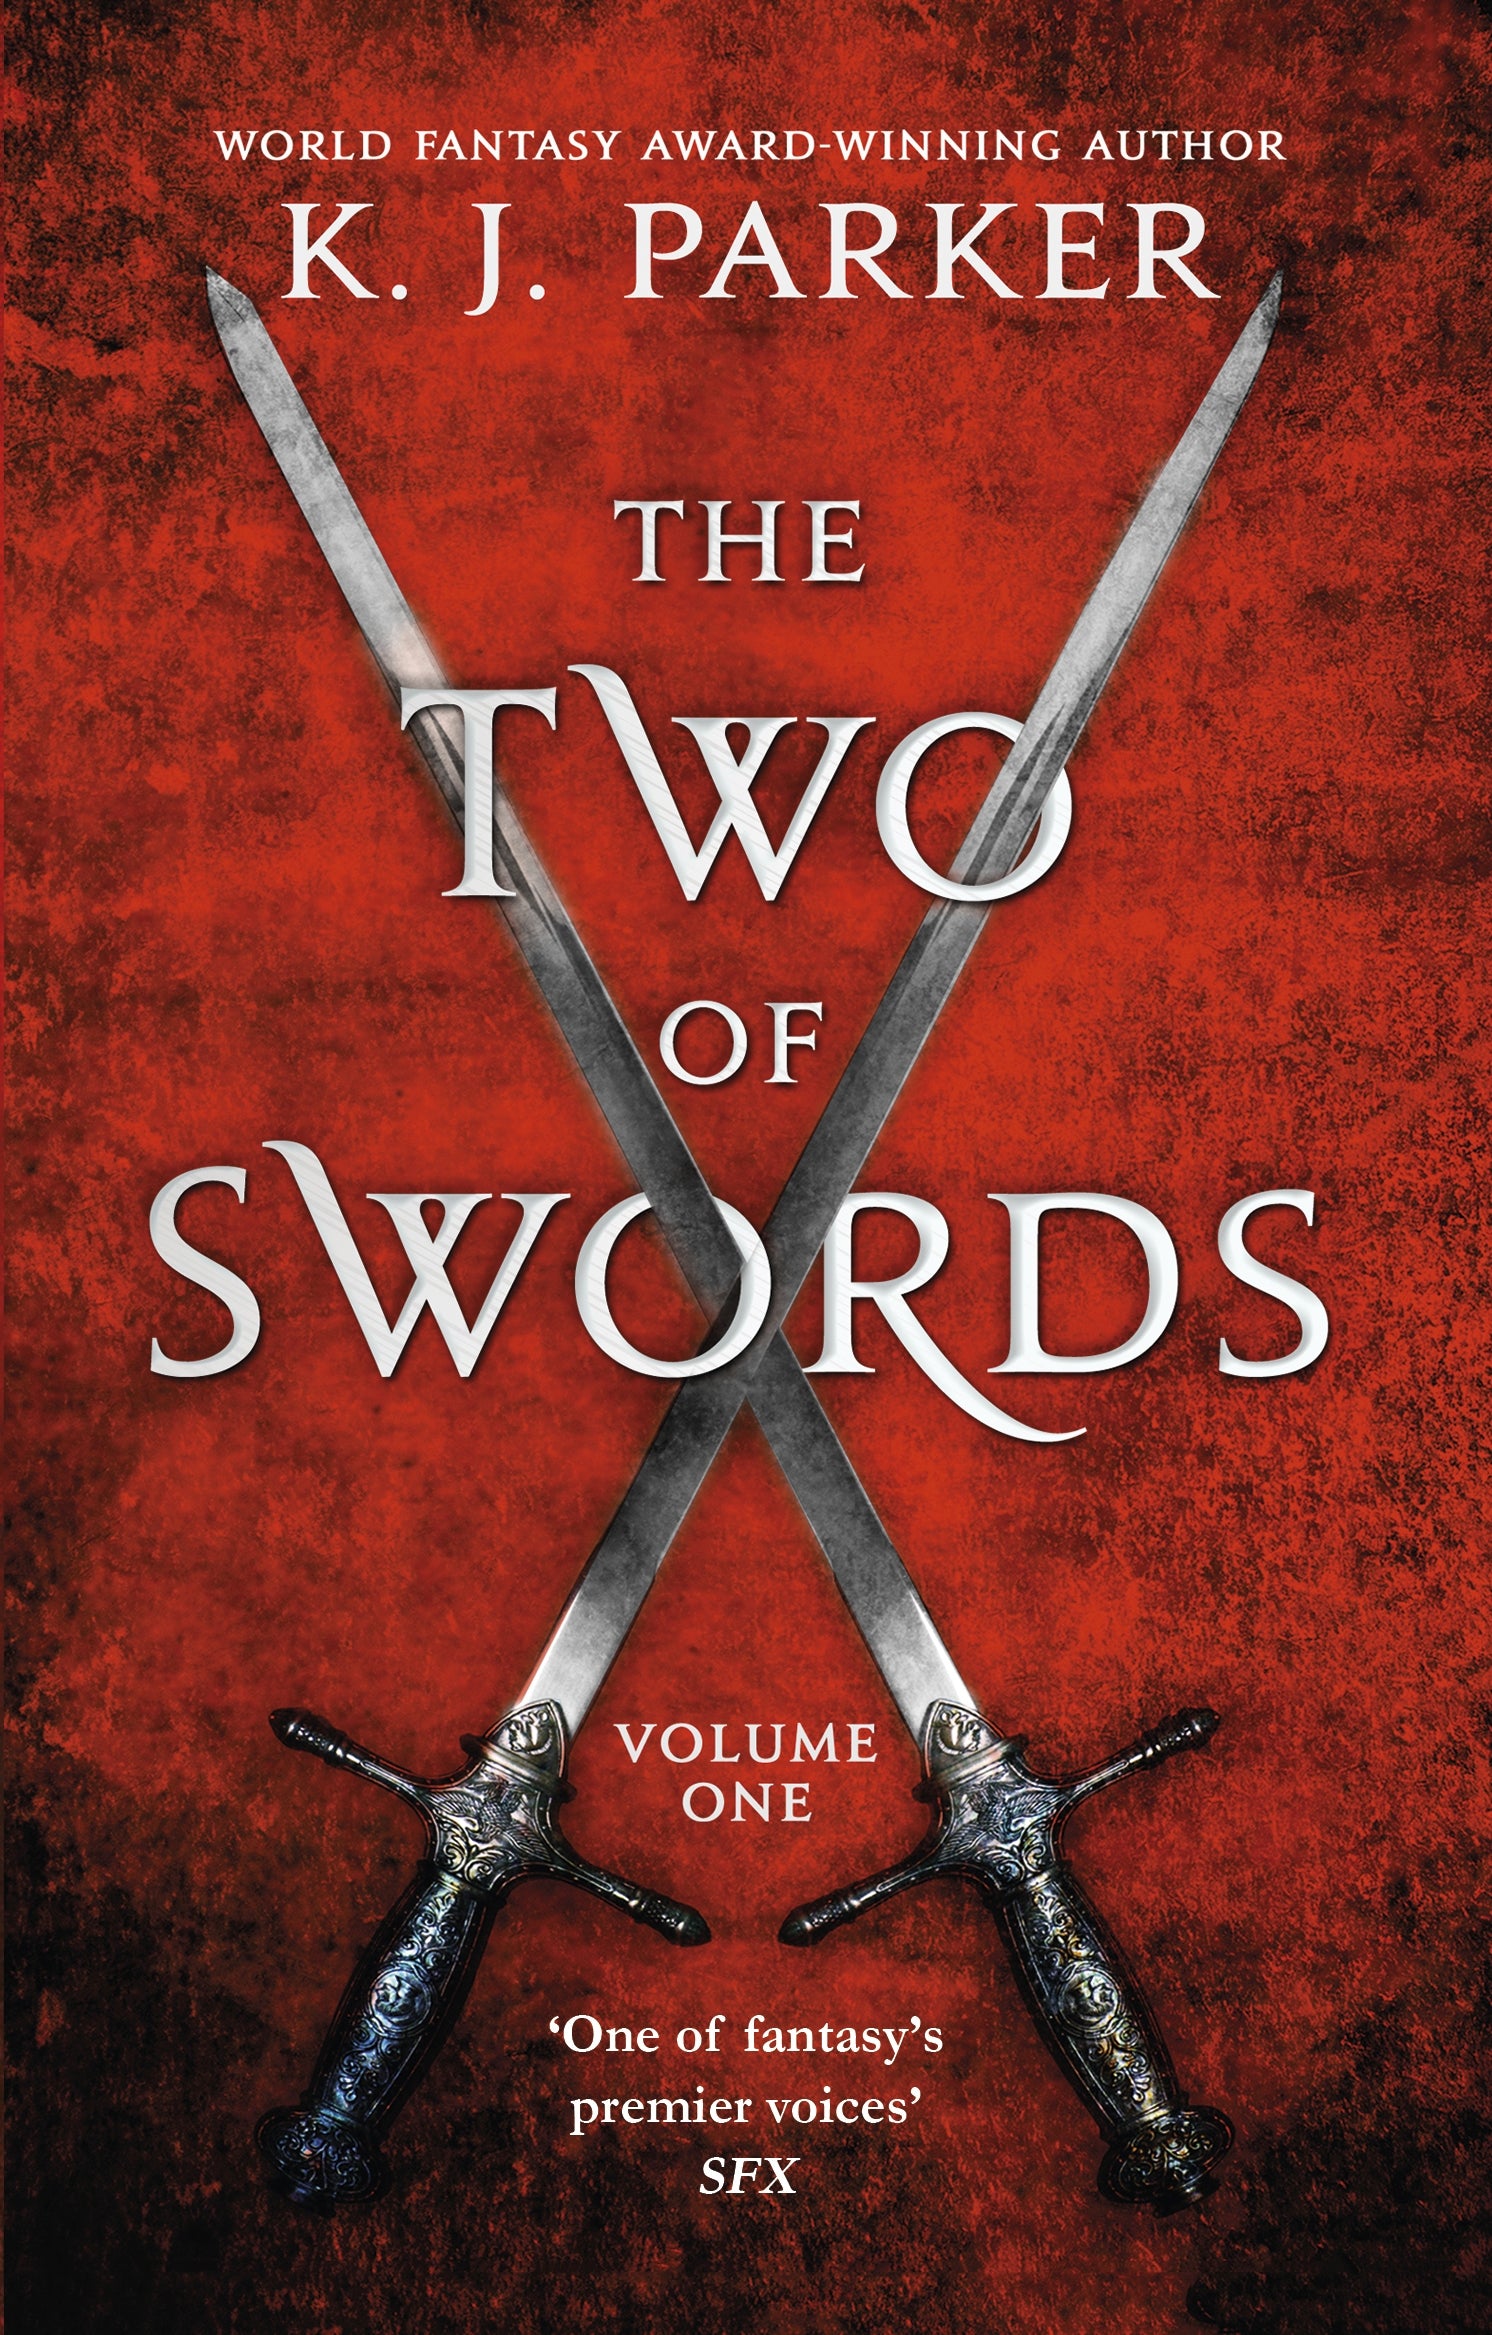 The Two of Swords: Volume One by K. J. Parker